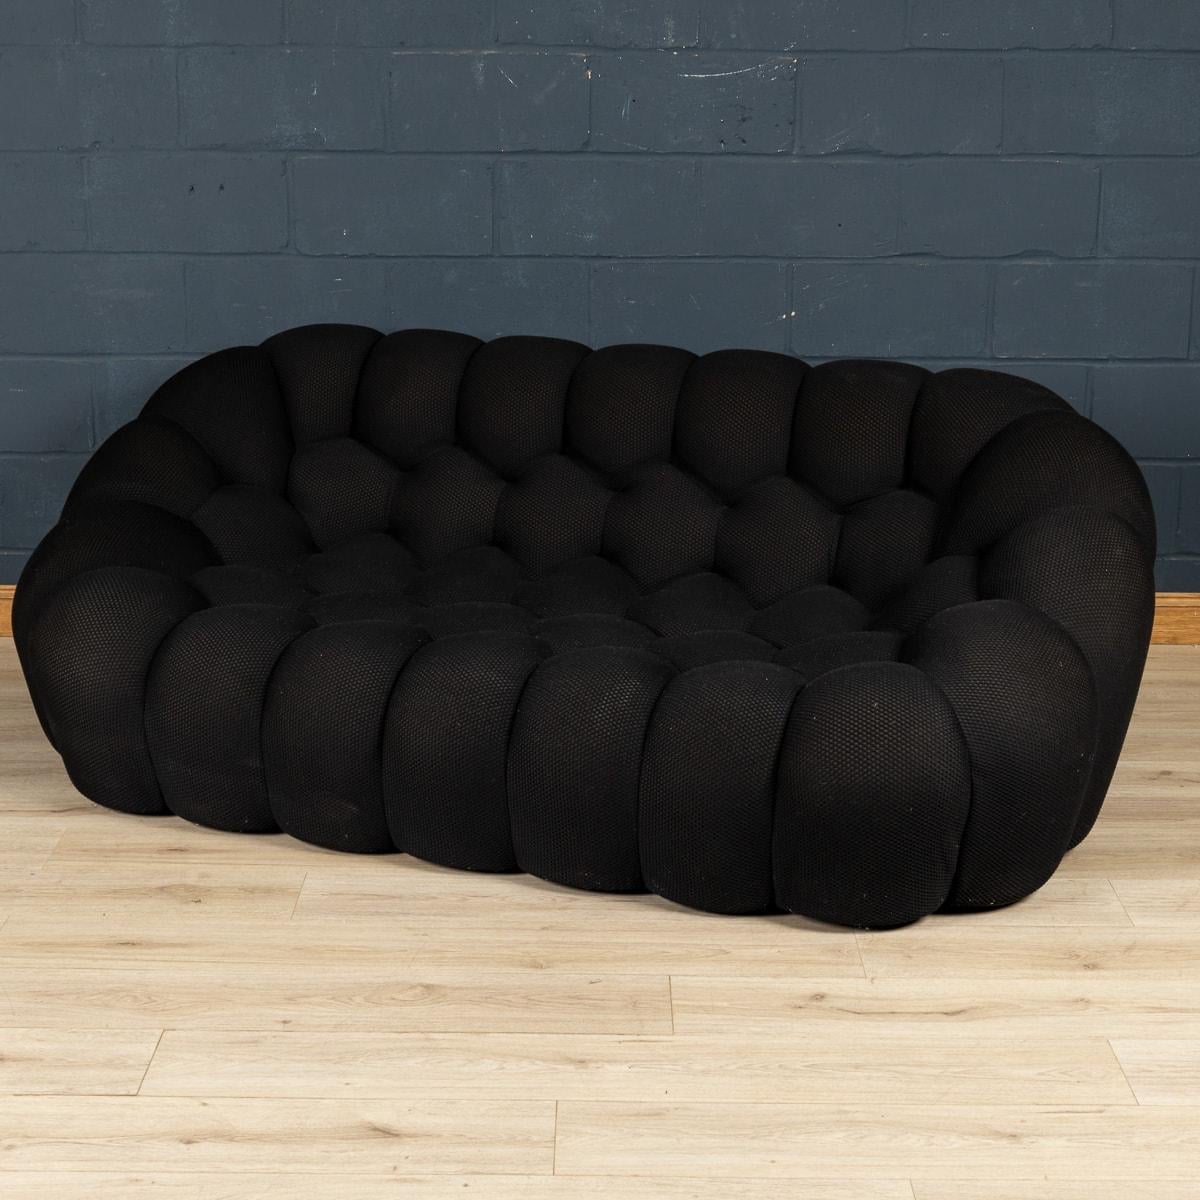 A beautiful black “Bubble“ sofa by Roche Bobois. Created by Sacha Lakic, a designer with a passion for cutting-edge technology, Bubble expresses the balance between innovation, function and emotion. Inspired by natural and mineral forms and entirely